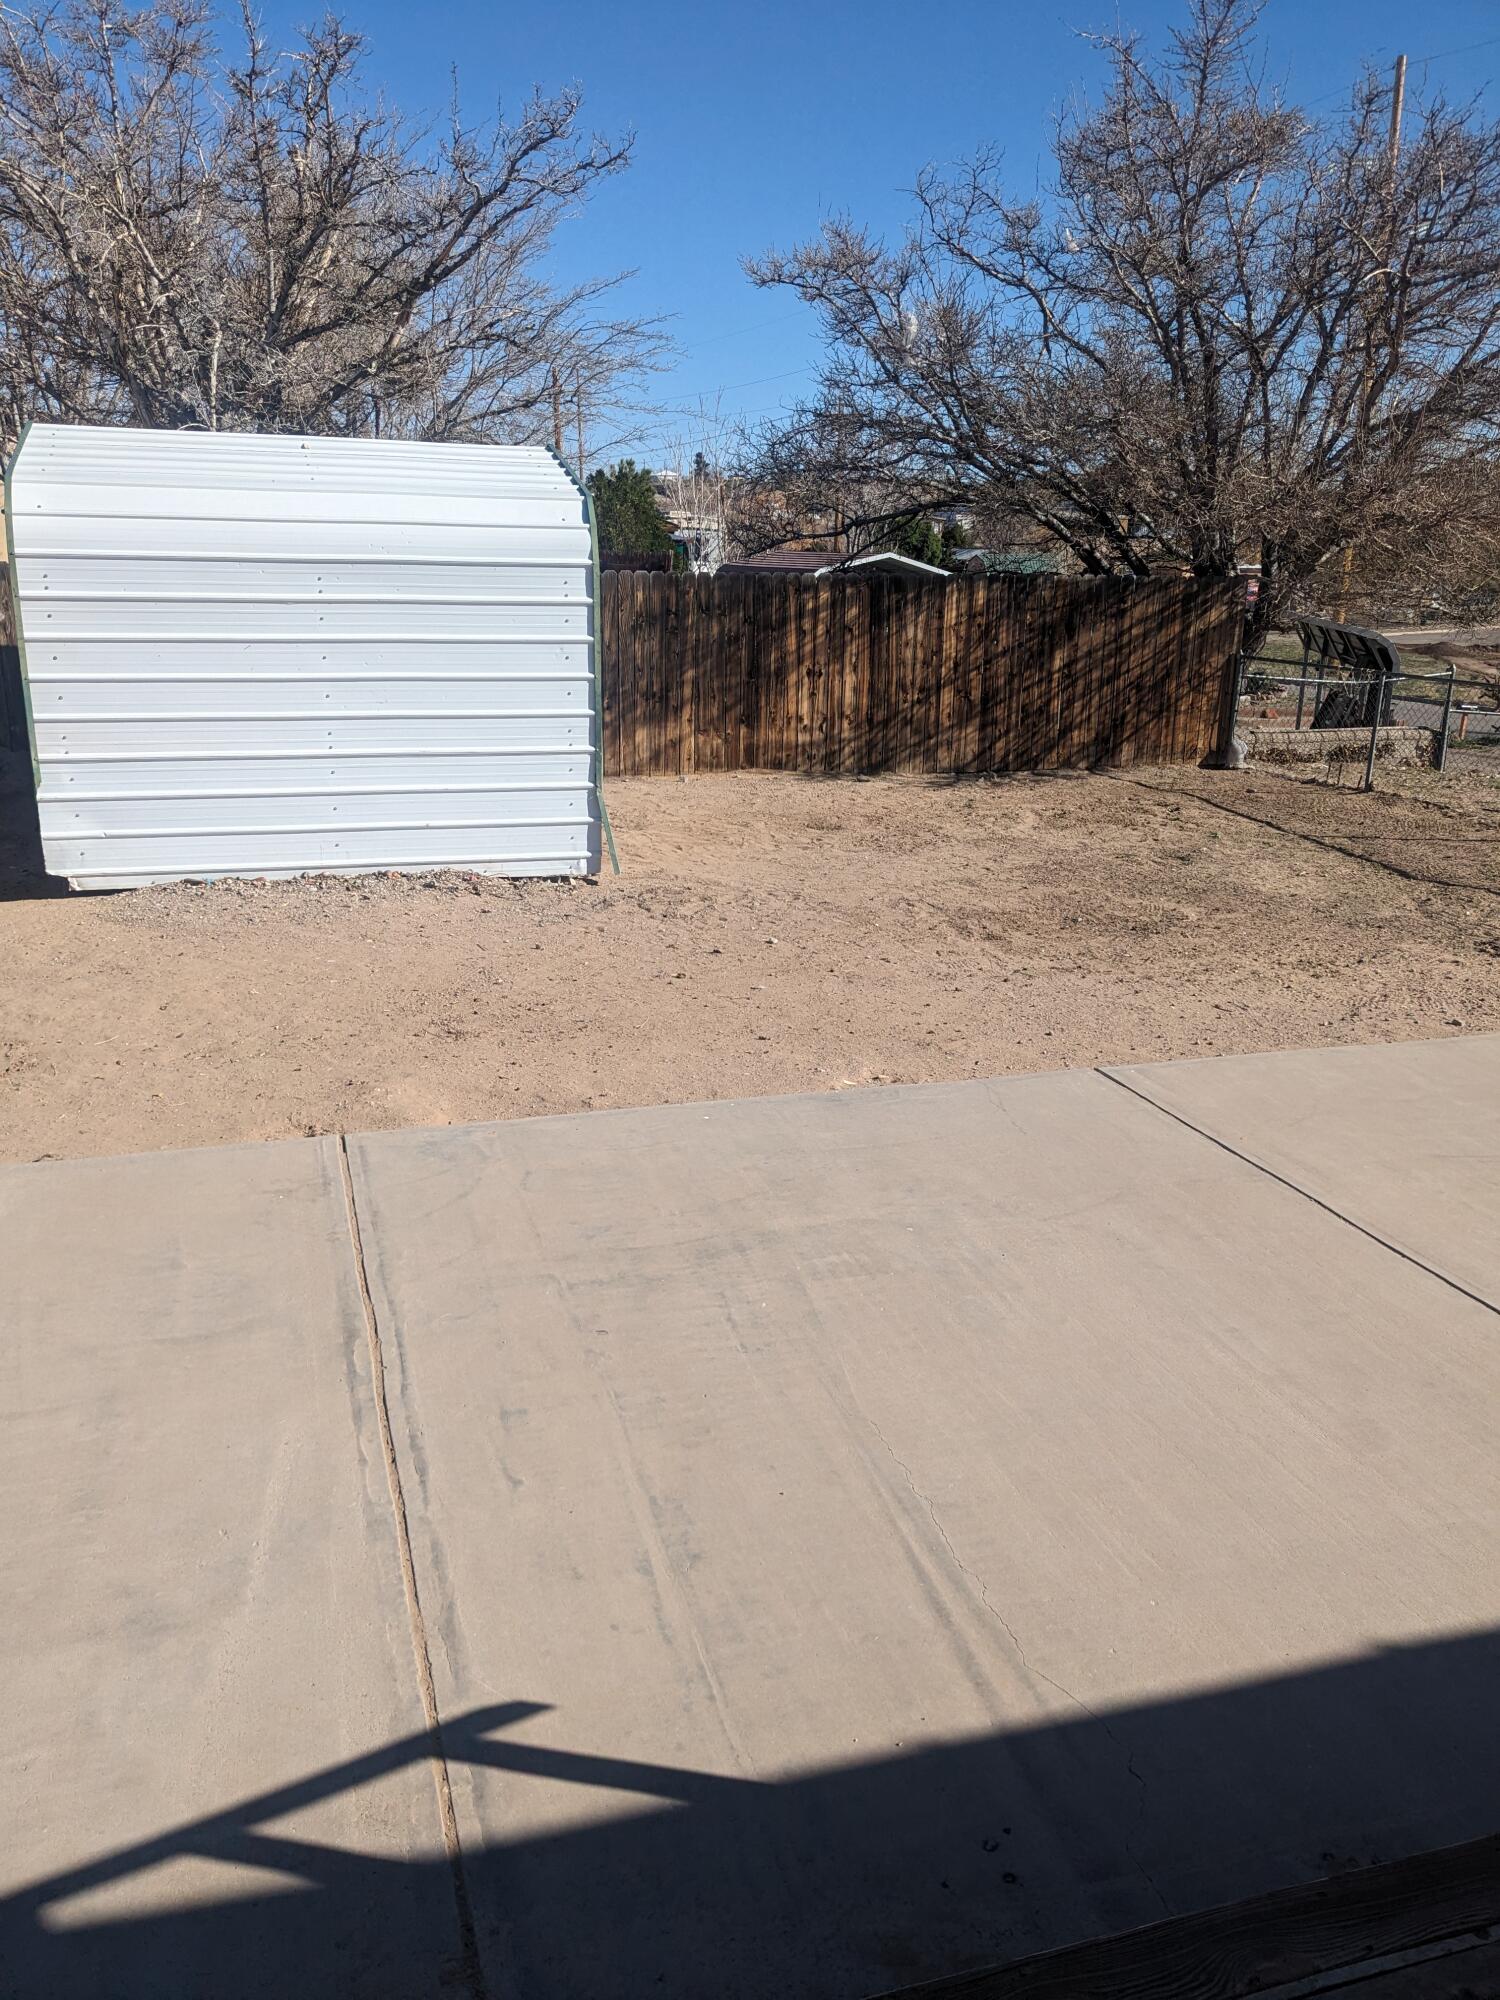 500 Ash Street, Truth or Consequences, New Mexico 87901, 3 Bedrooms Bedrooms, ,2 BathroomsBathrooms,Residential,For Sale,500 Ash Street,1059698